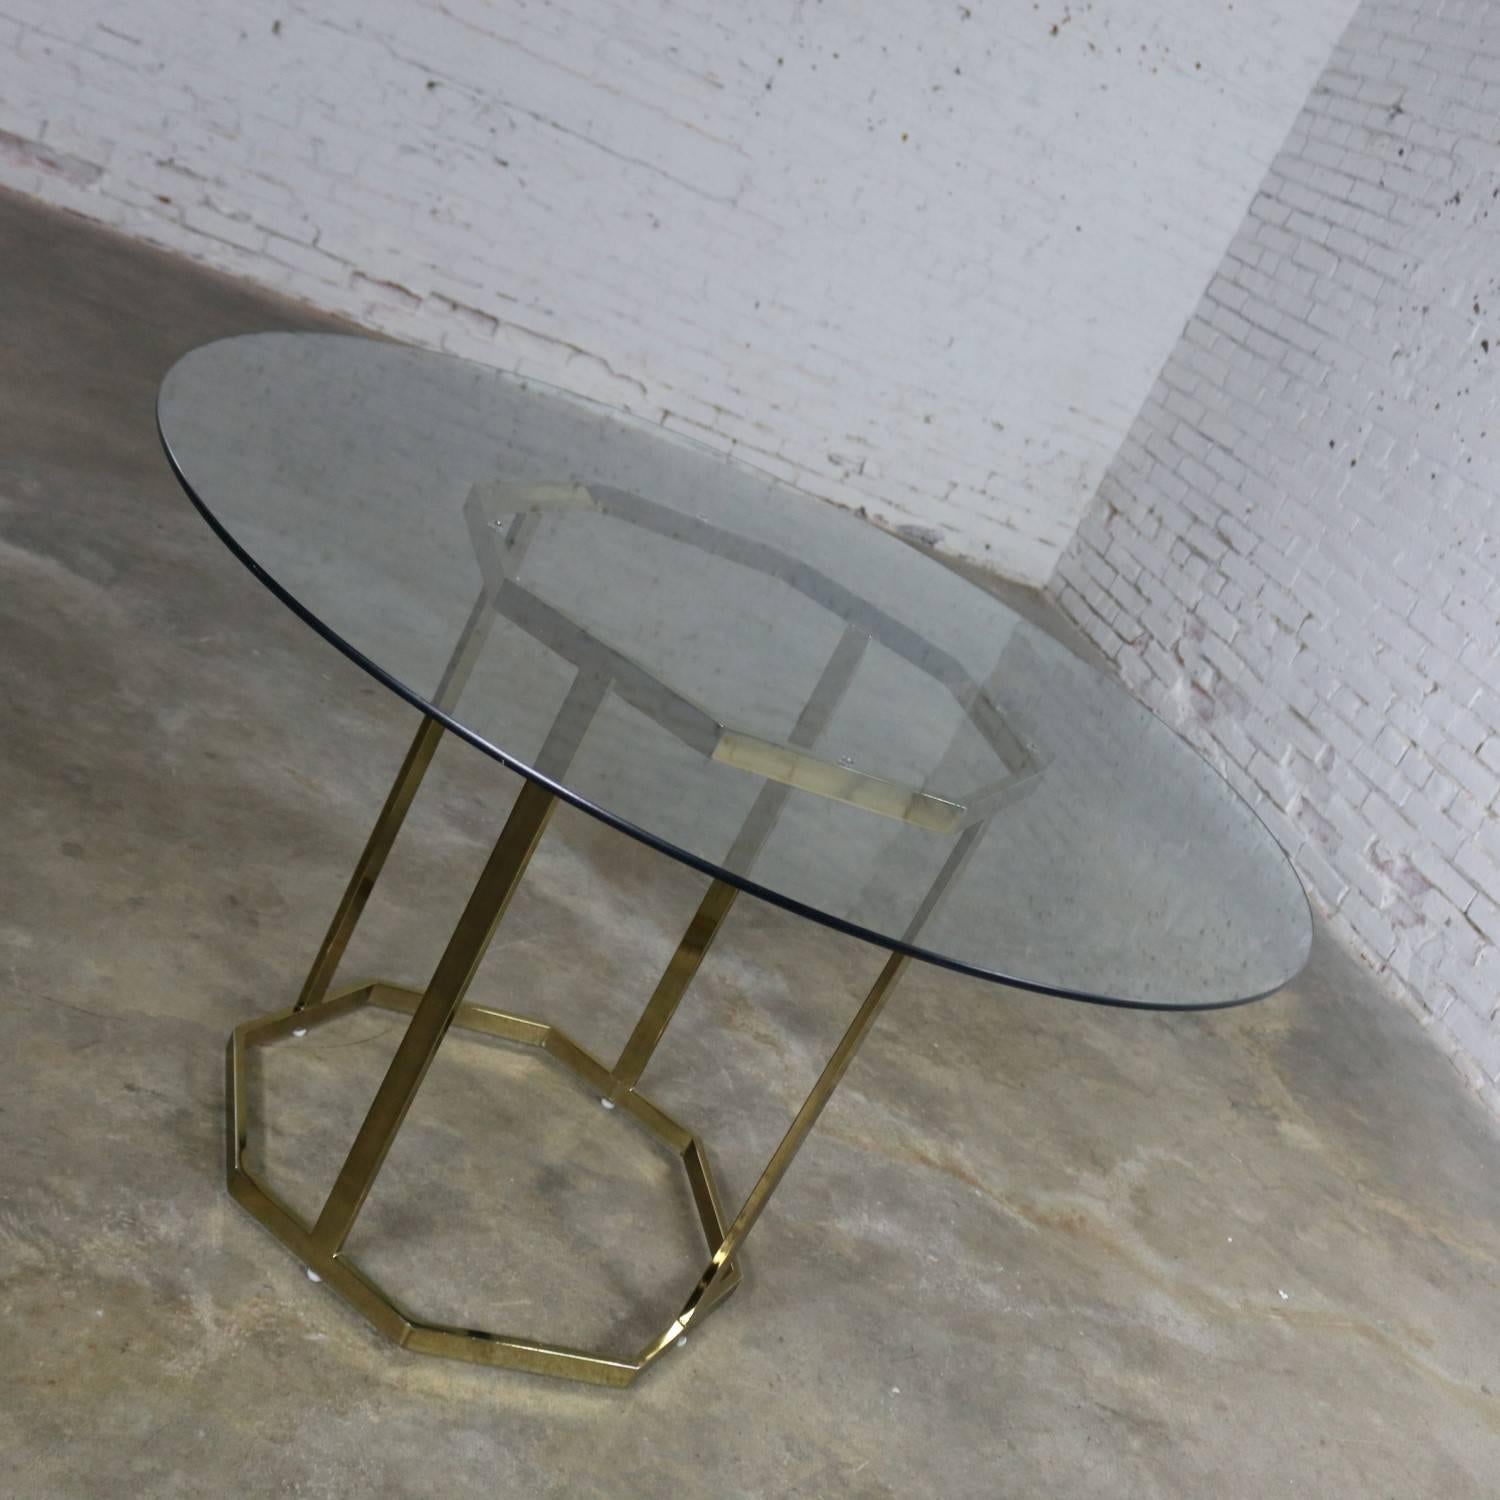 Handsome brass-plated metal tube octagon dining table base with round 3/8 inch glass top in the style of Milo Baughman for Thayer Coggin. This table is in very good original vintage condition. The base has some minor scratching and loss of plating